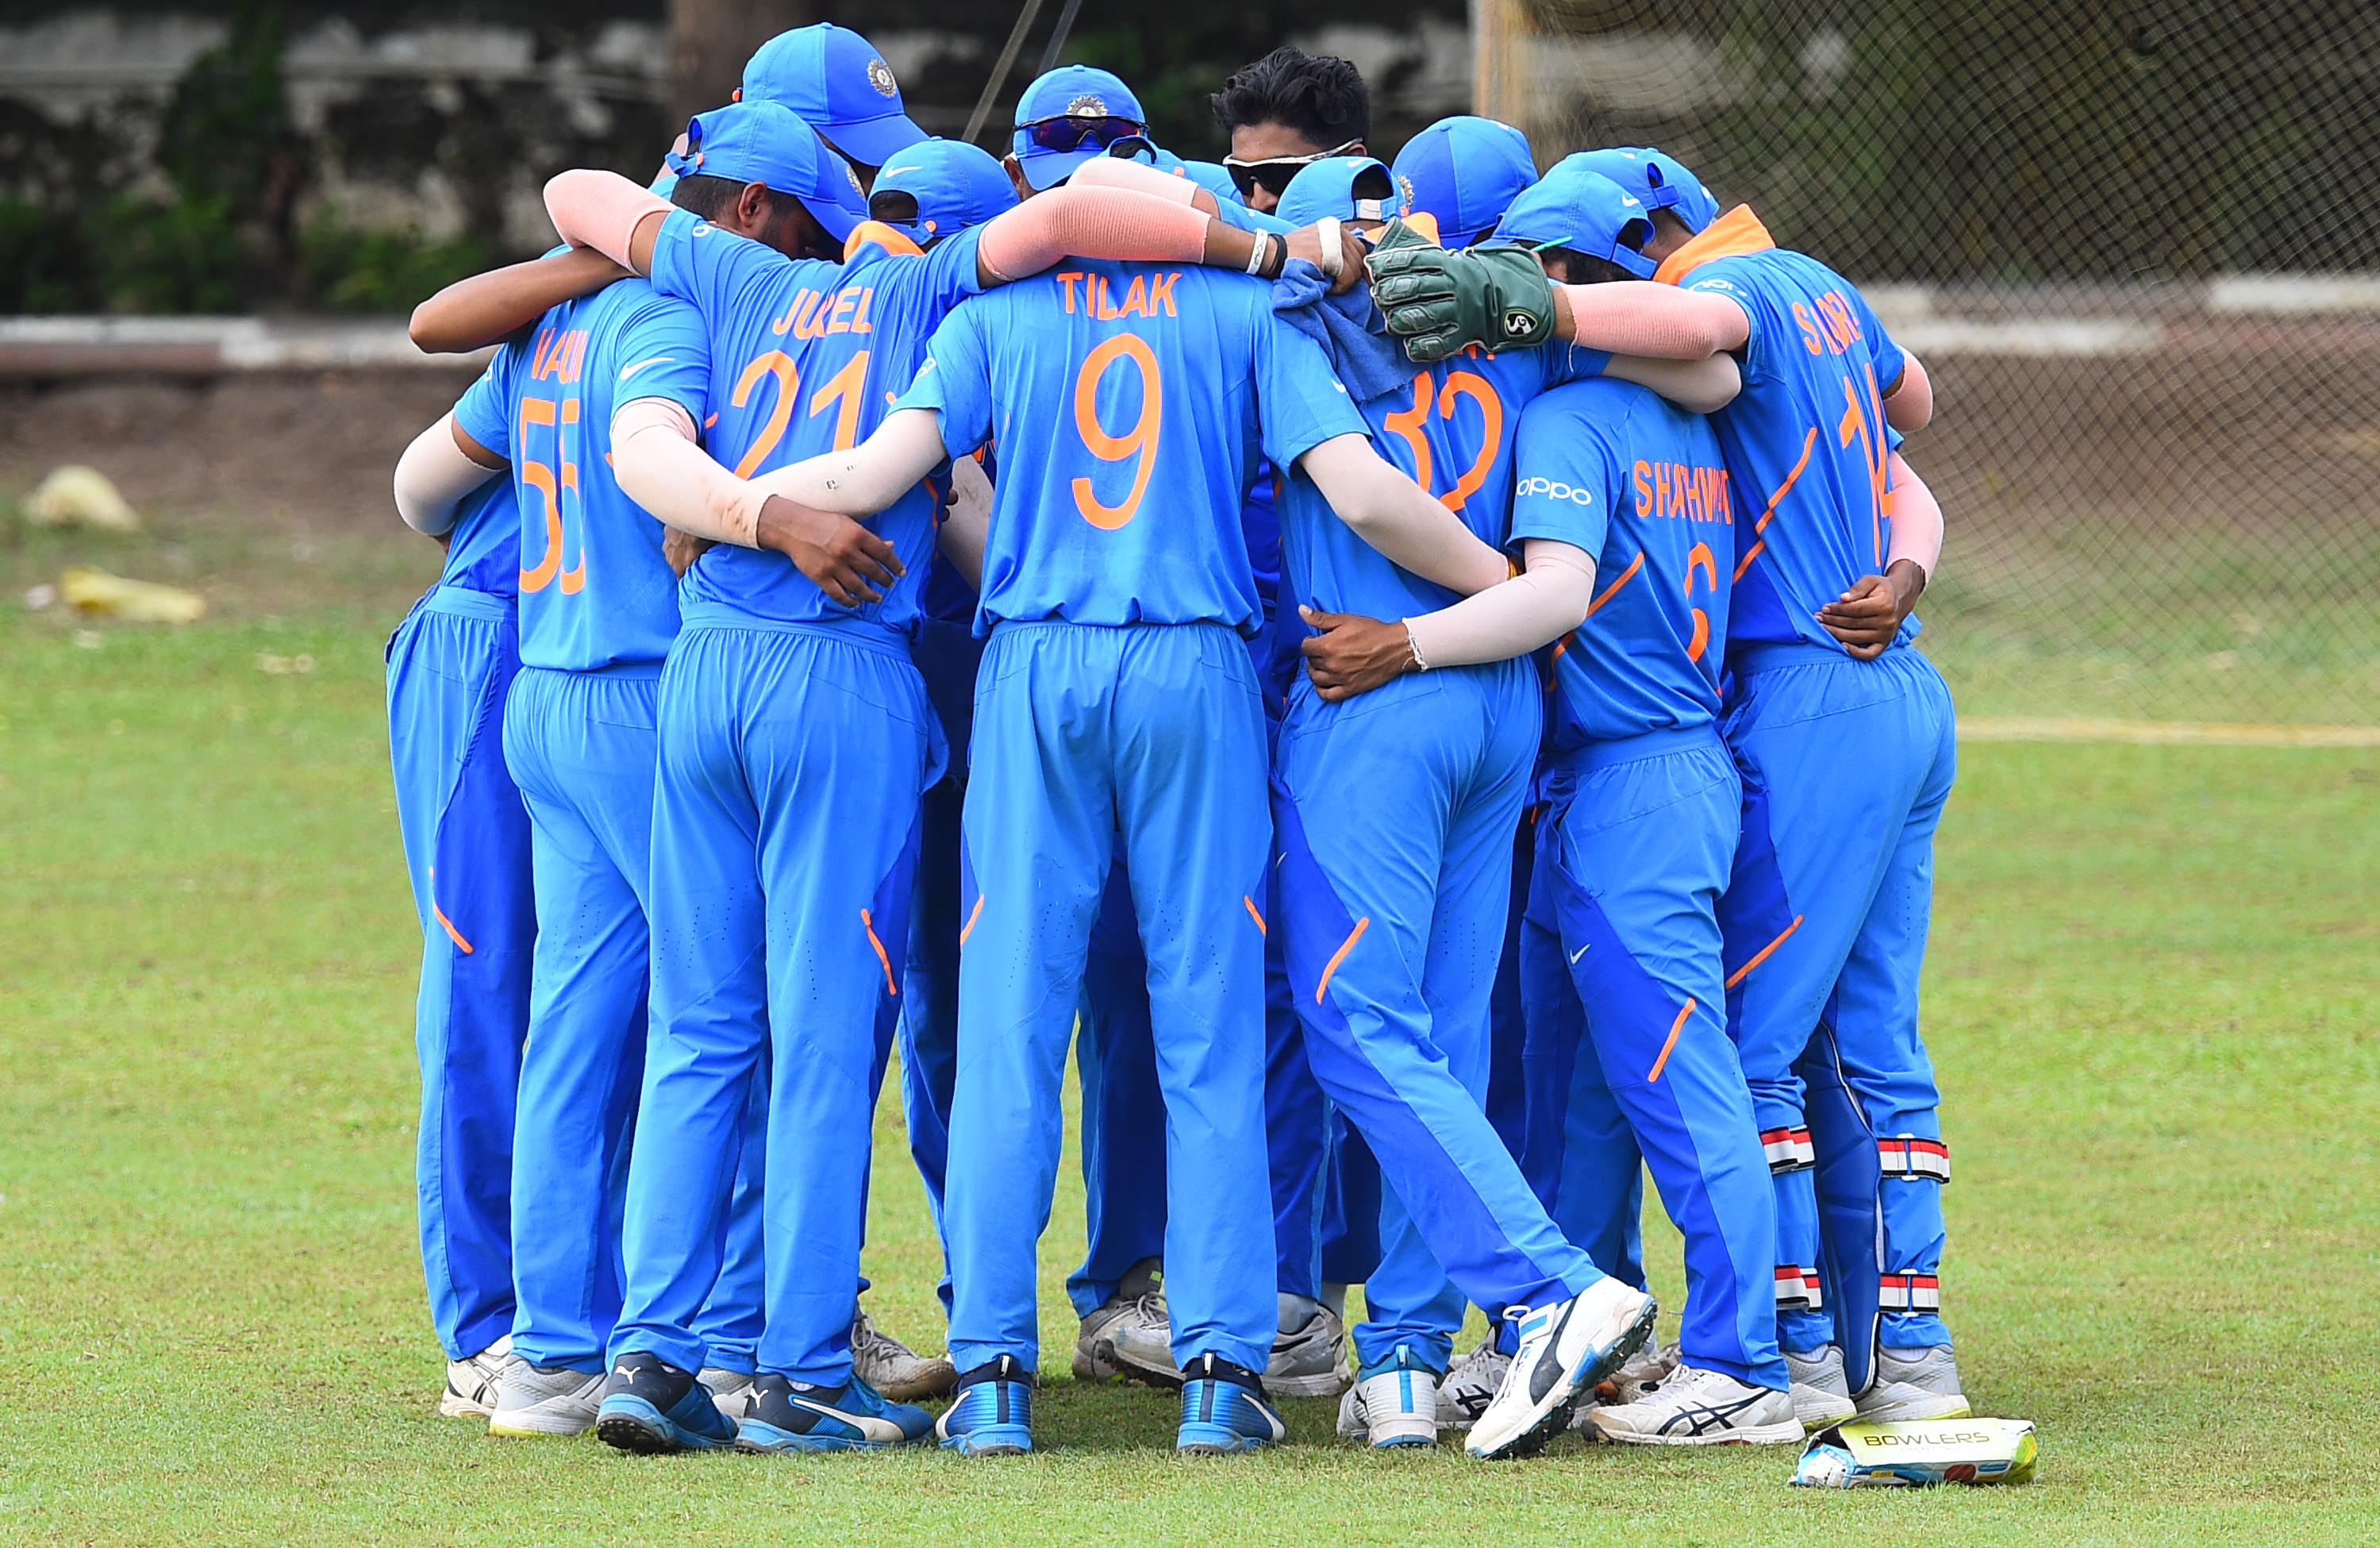 India beat Afghanistan in close contest; Pakistan sword edge Kuwait by 163 runs